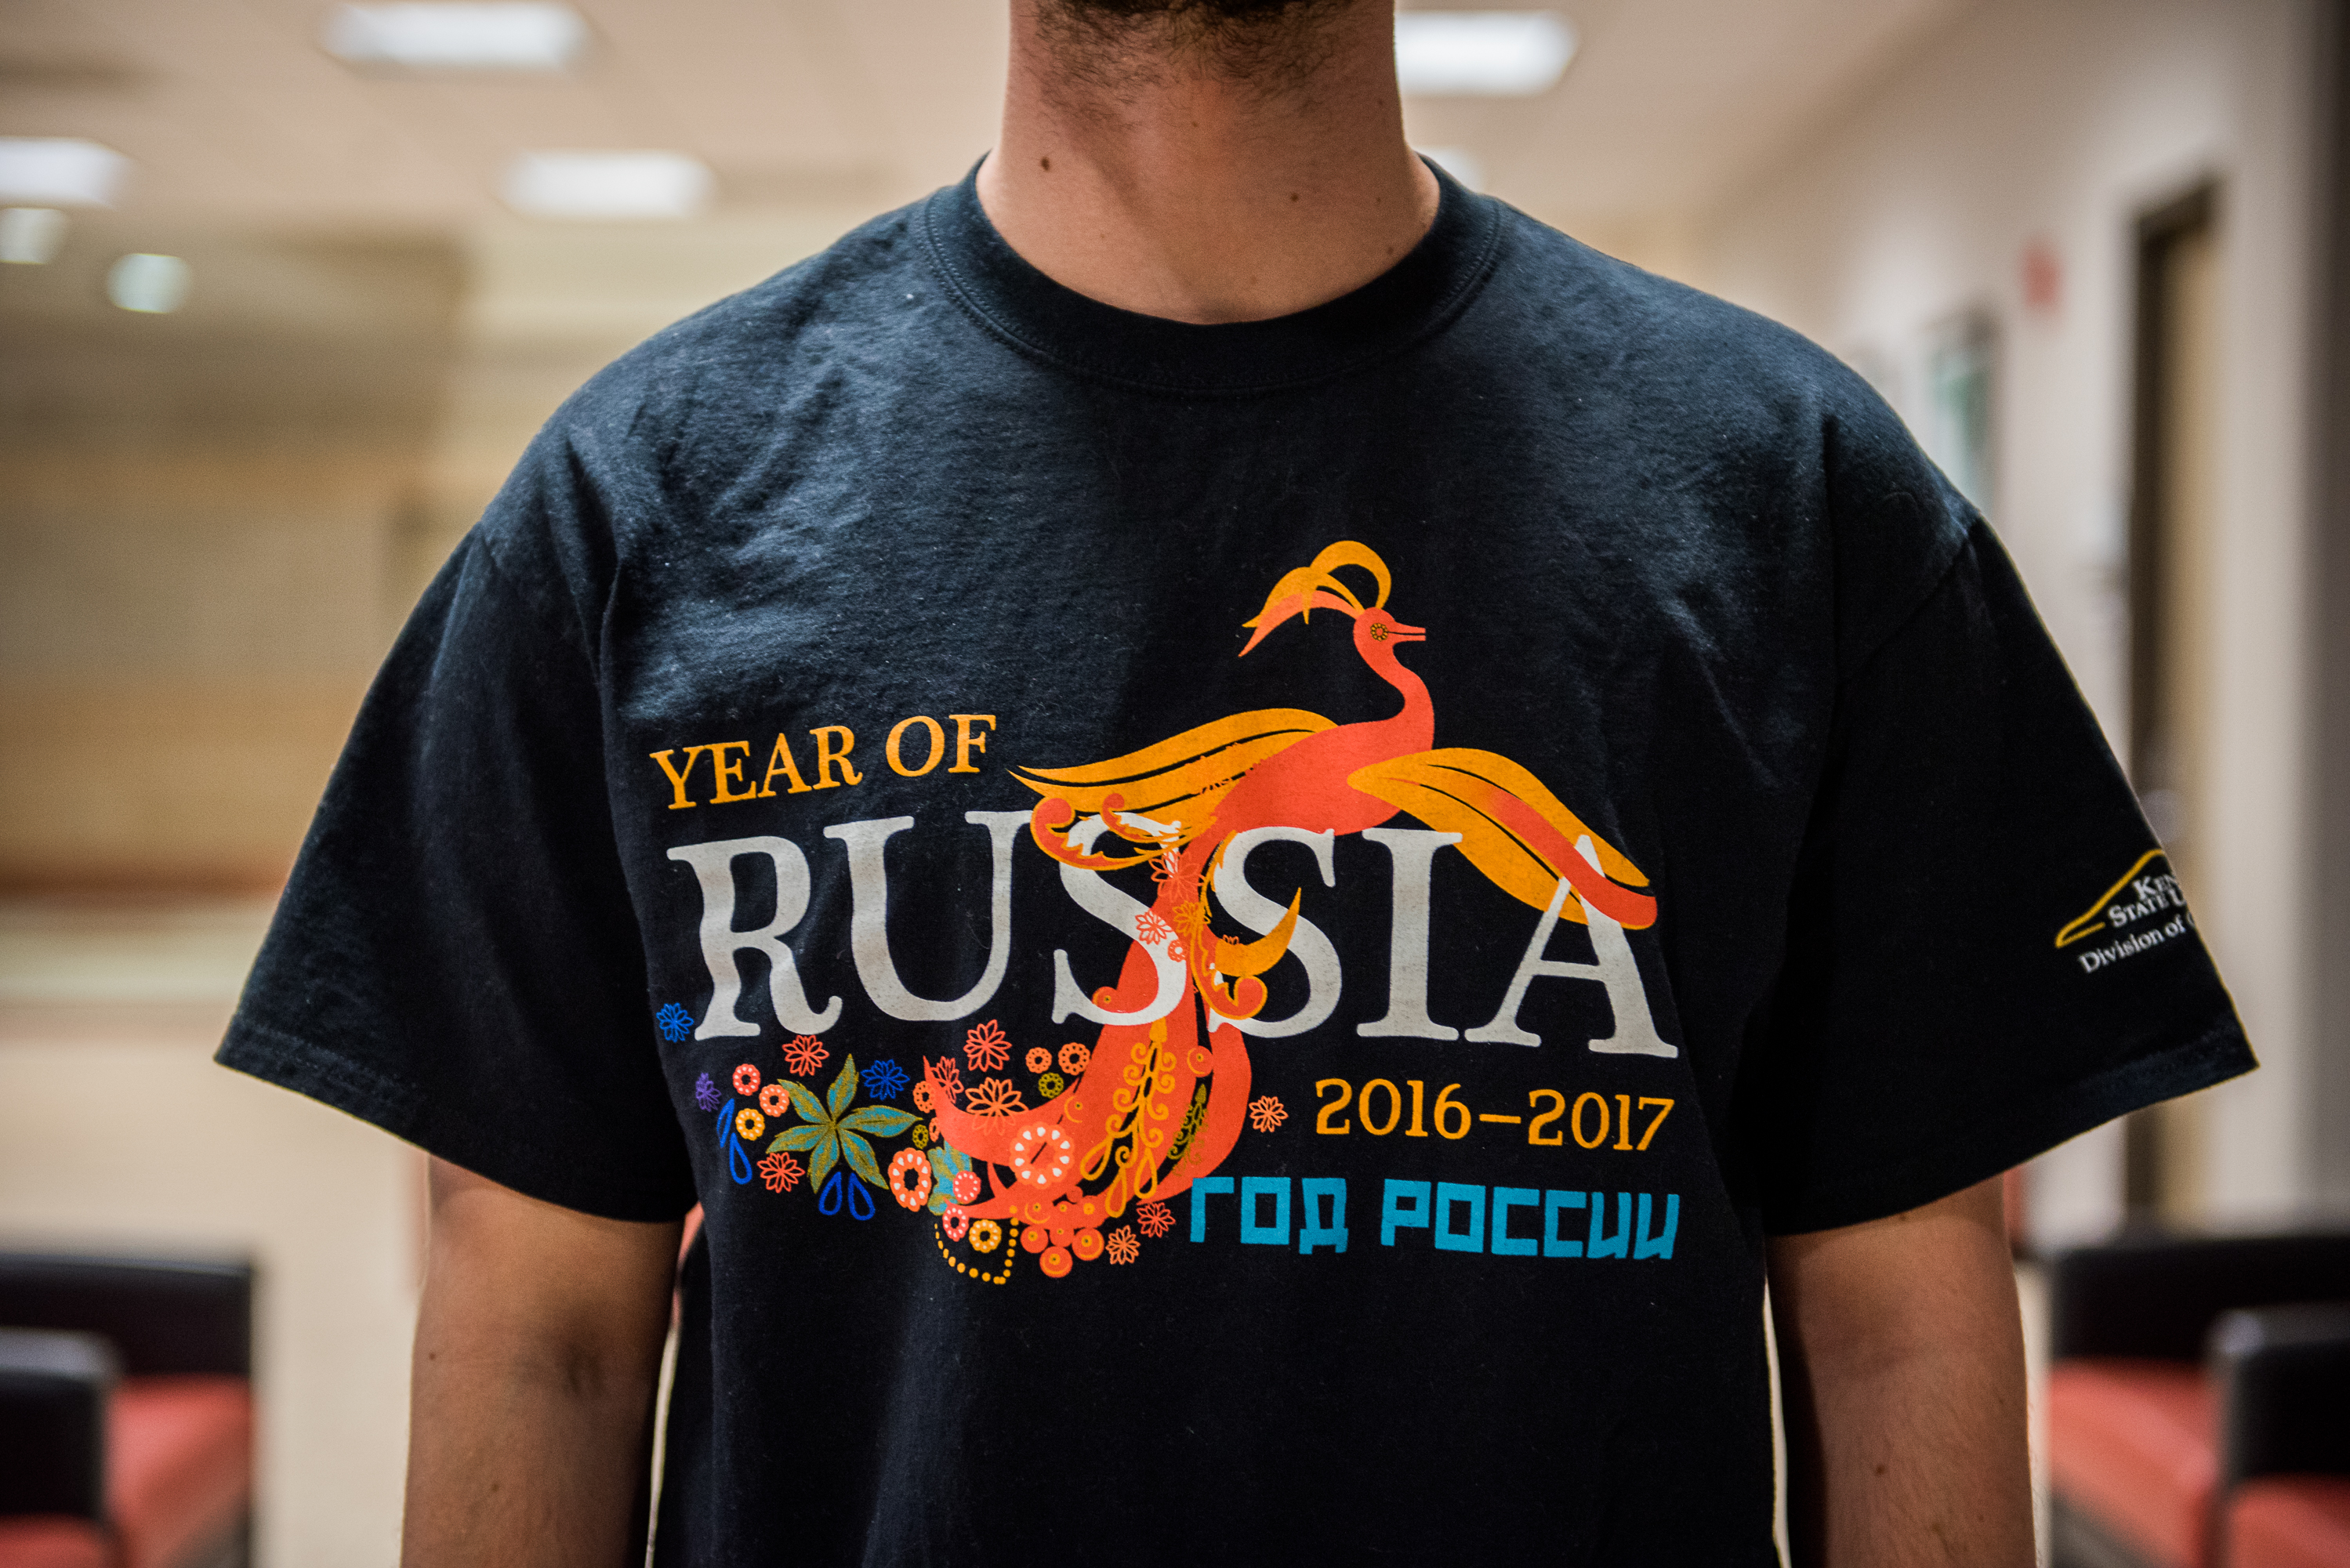 ‘Year of Russia’ to close with two-day symposium